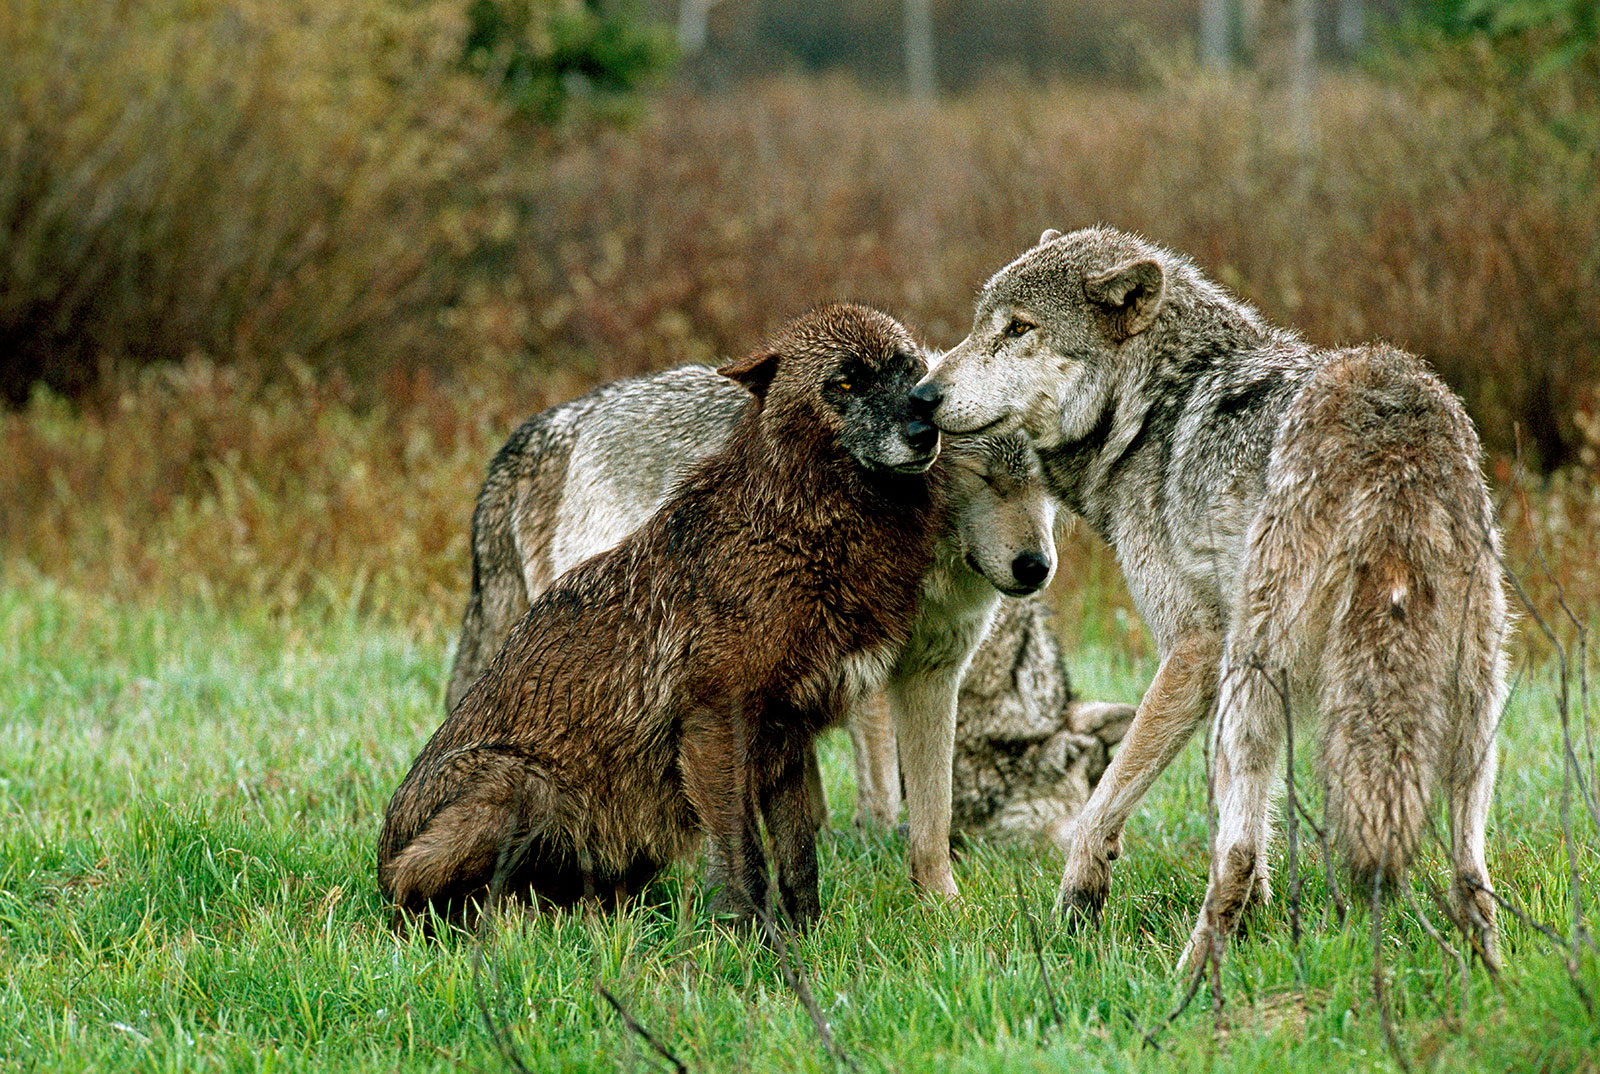 DID YOU KNOW? Wolves are intensely social and devoted to family.